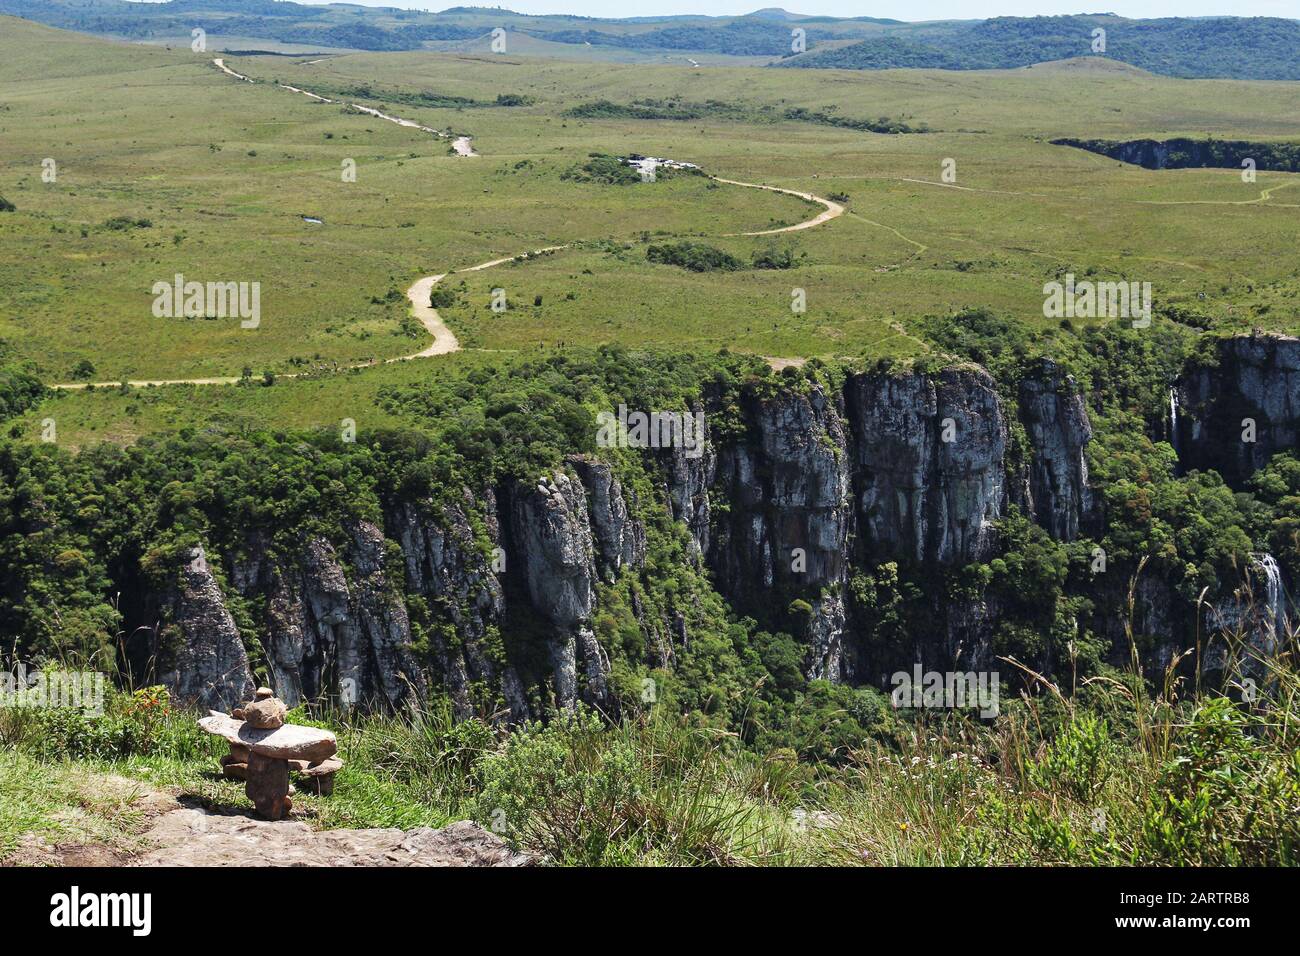 highest point of the canyon and that offers the best view. There is the Serra Geral National Park. Stock Photo